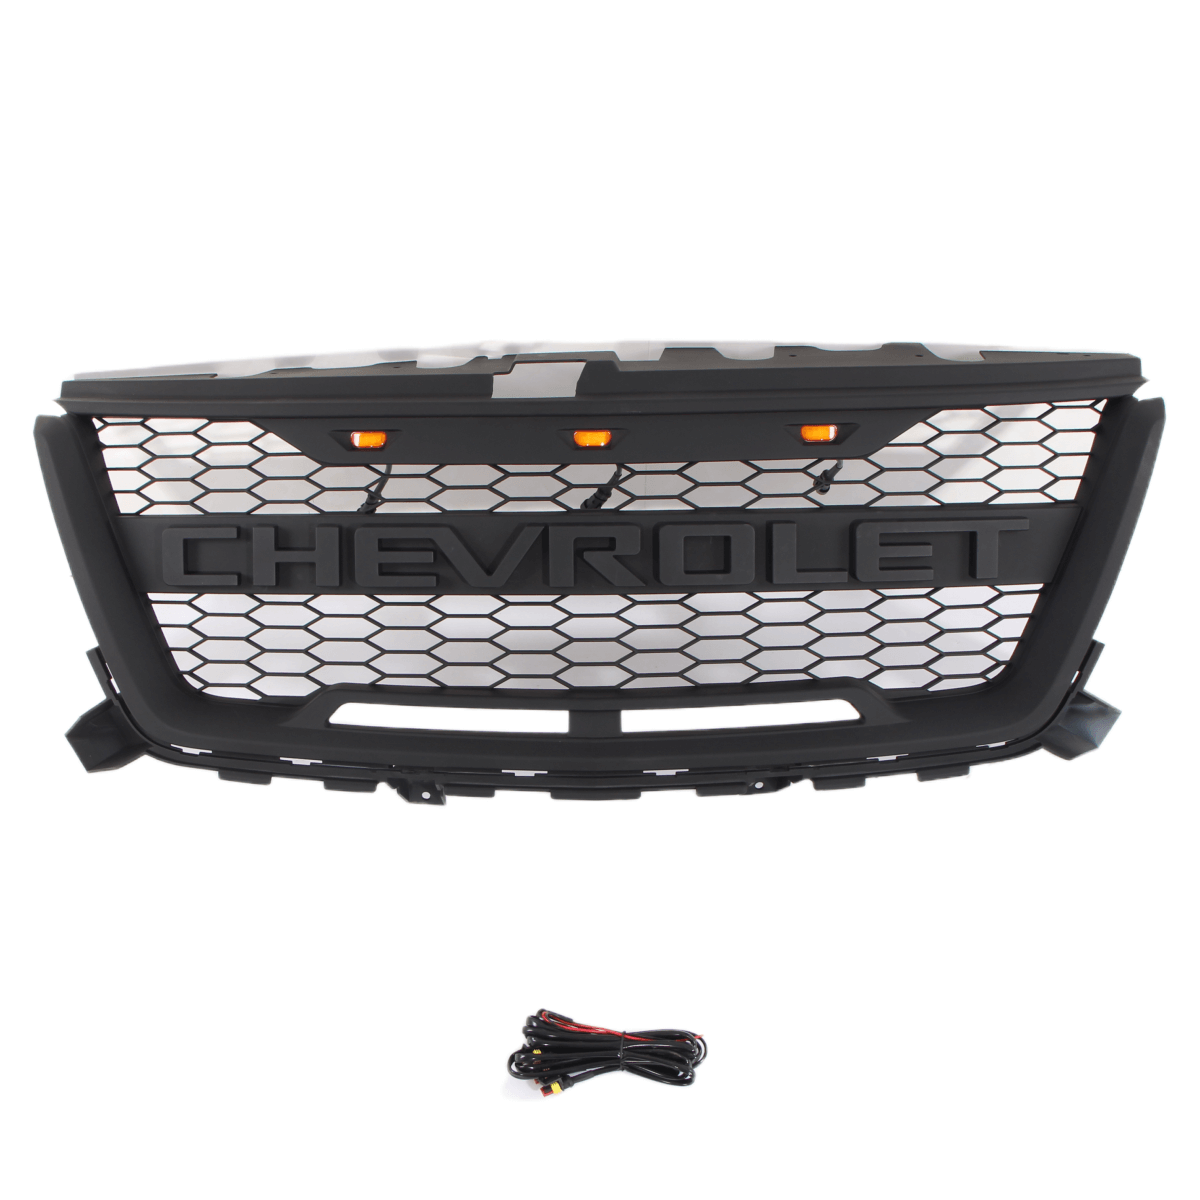 {WildWell}{ Chevrolet Grille}-{ Chevrolet Colorado Grille 2016-2020/2}-Front